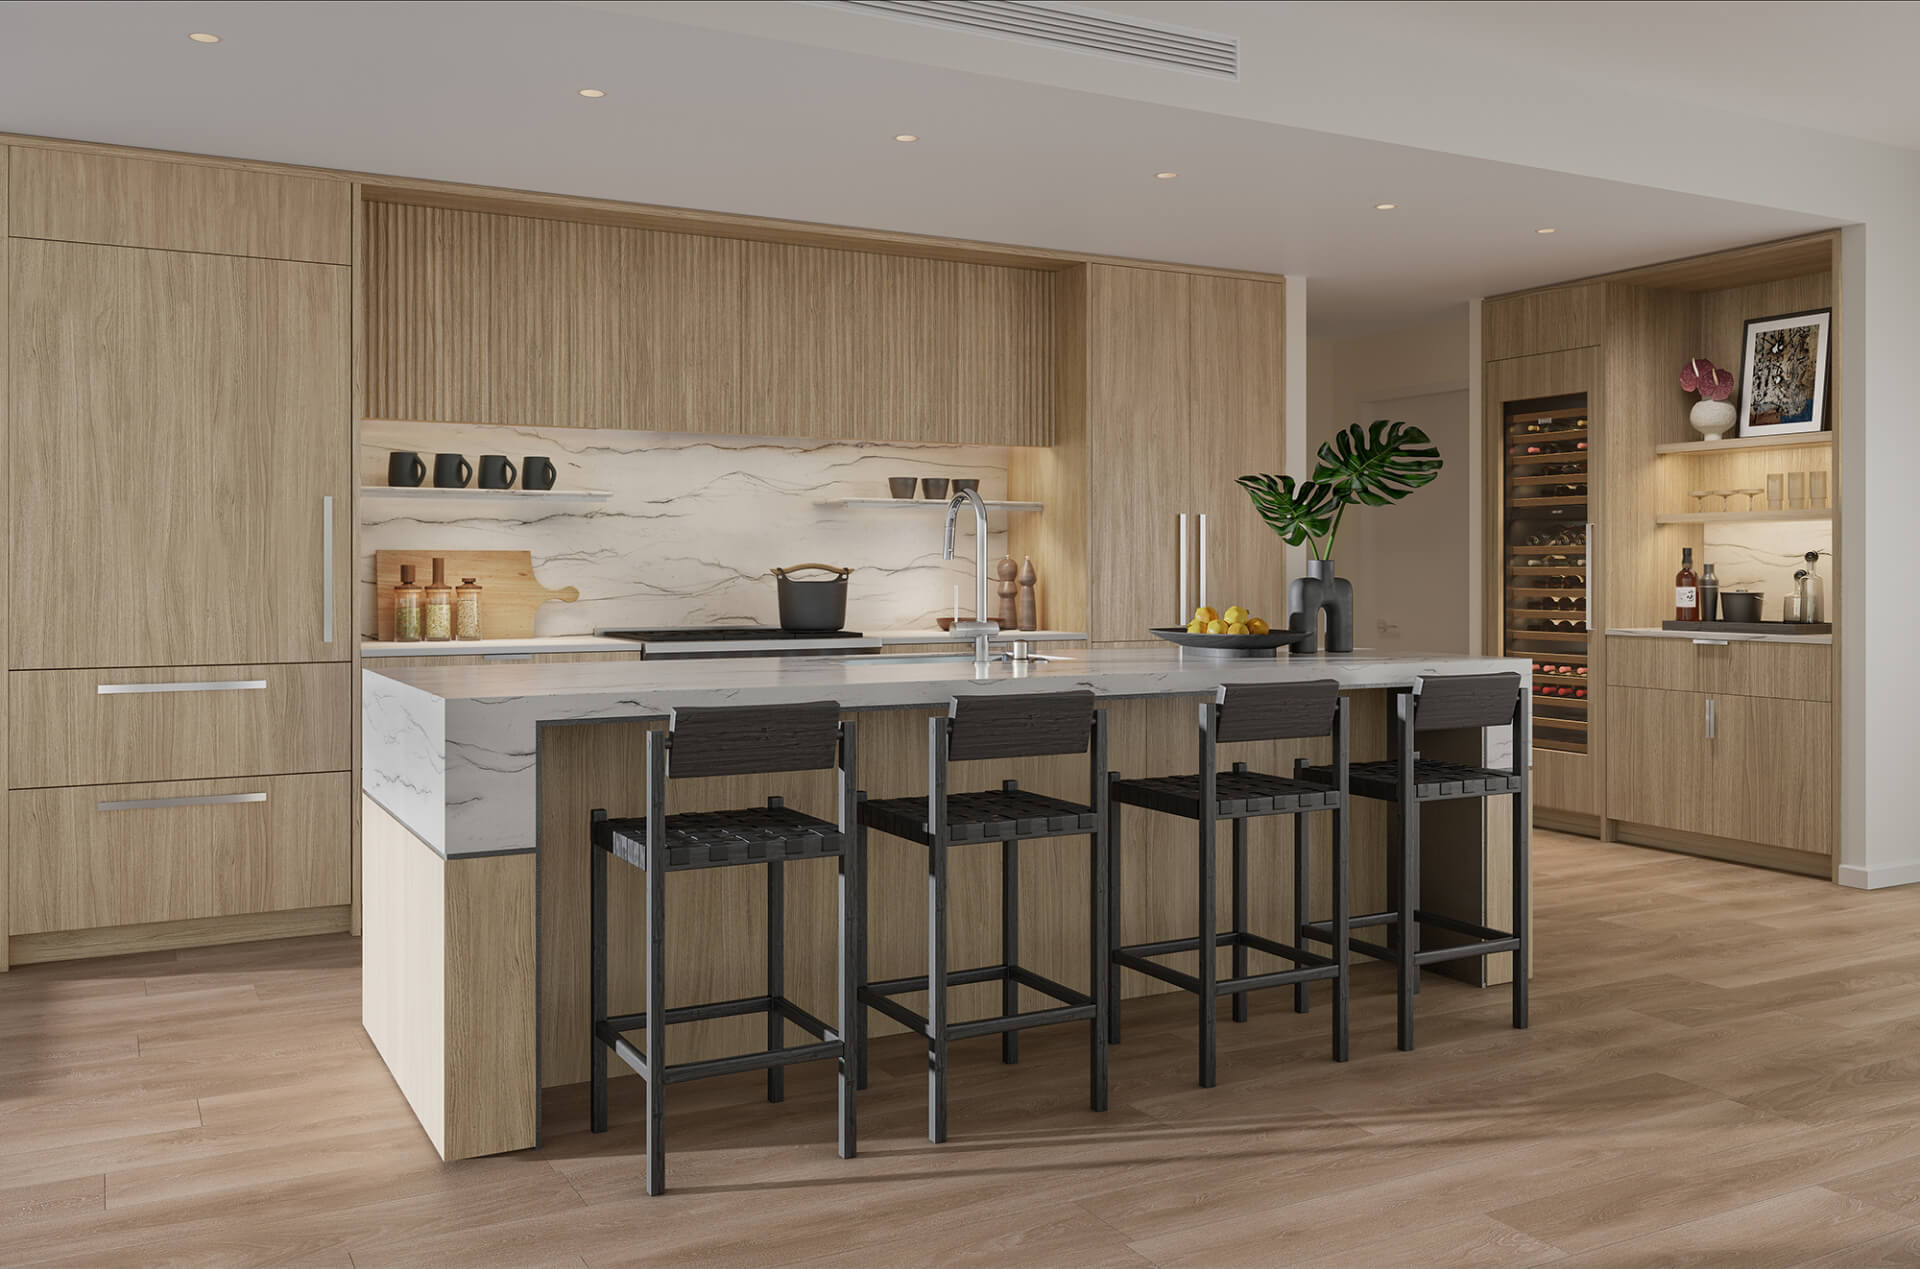 Kalae Residence Kitchen with wood cabinetry and island in light color scheme.